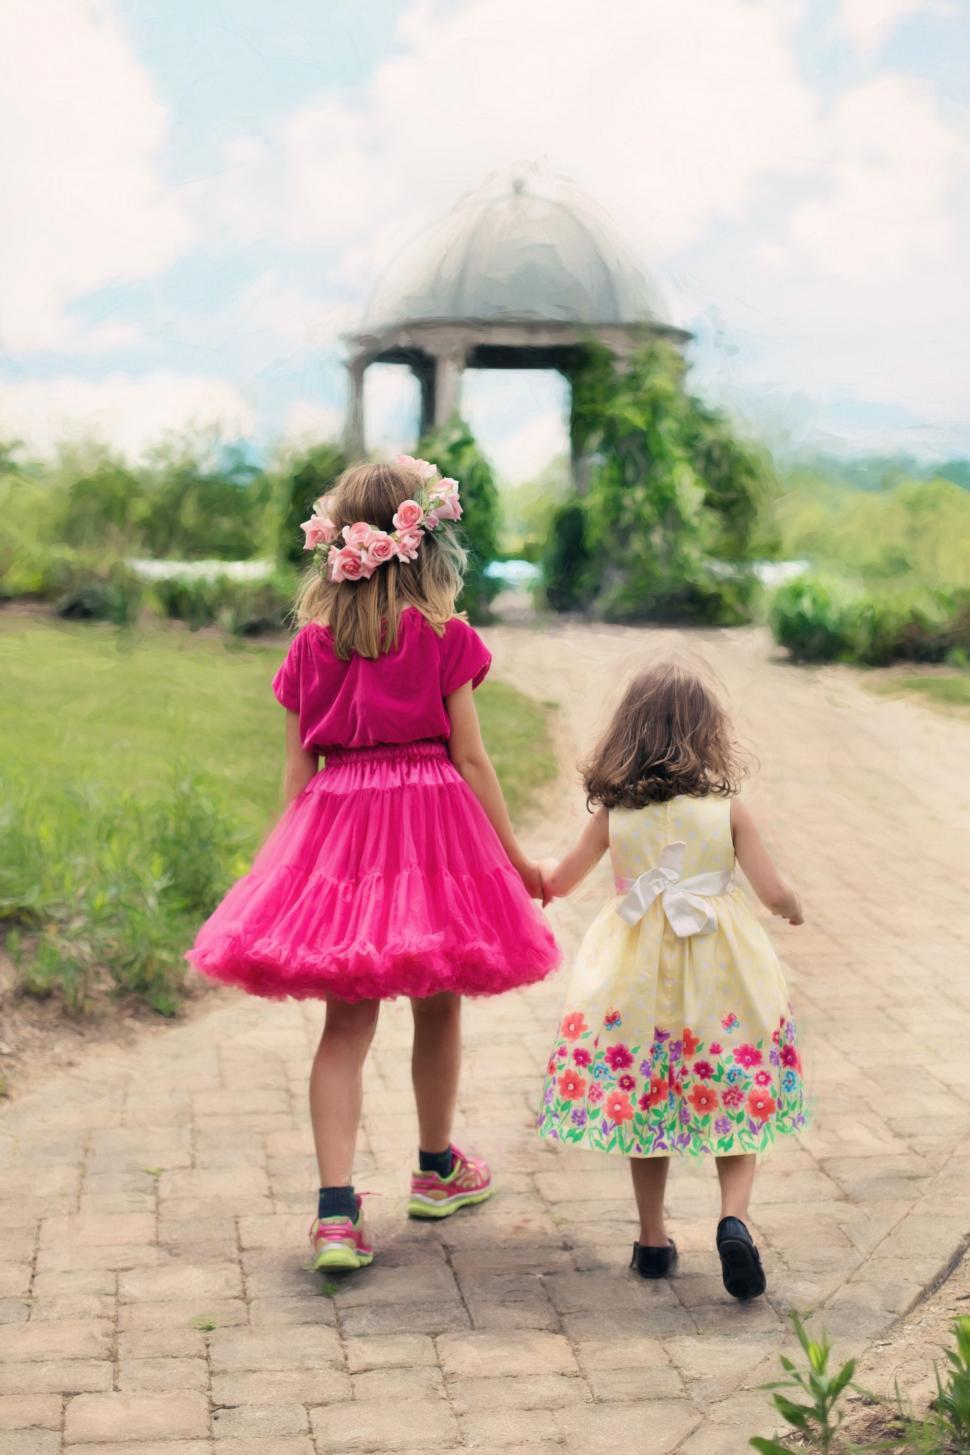 Two Little Girls Image & Photo (Free Trial)